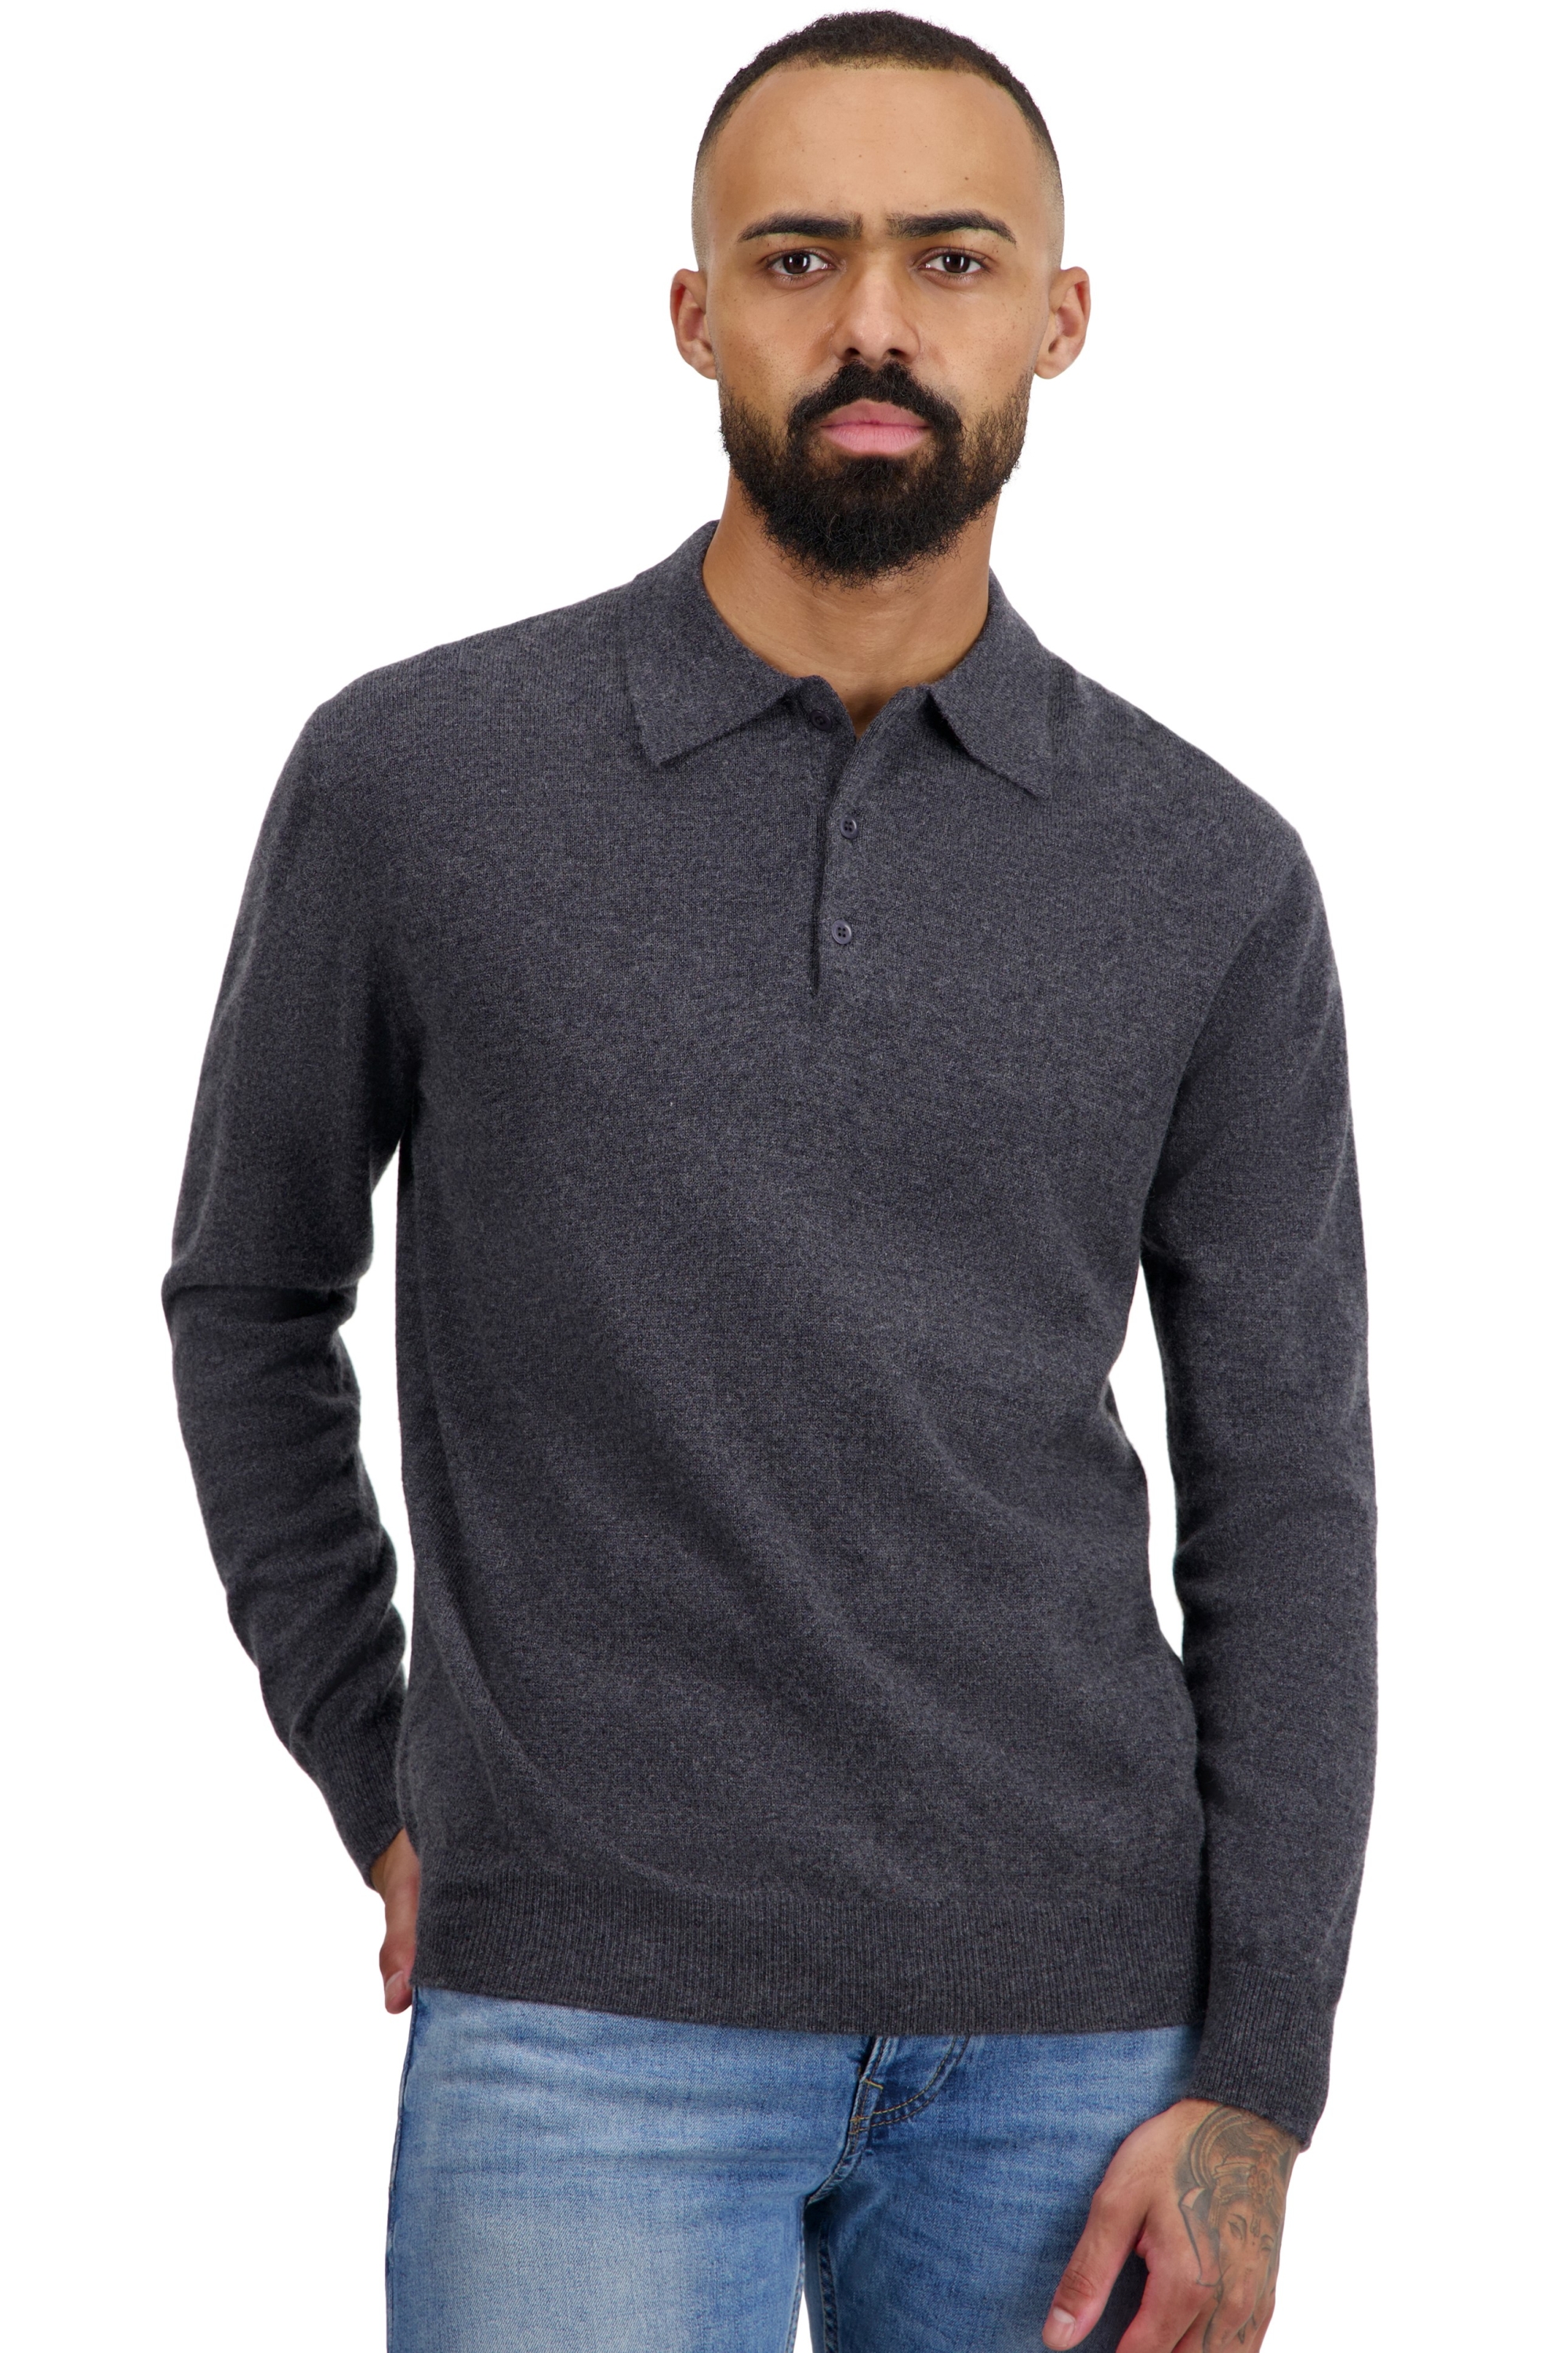 Cashmere men polo style sweaters tarn first charcoal marl 2xl